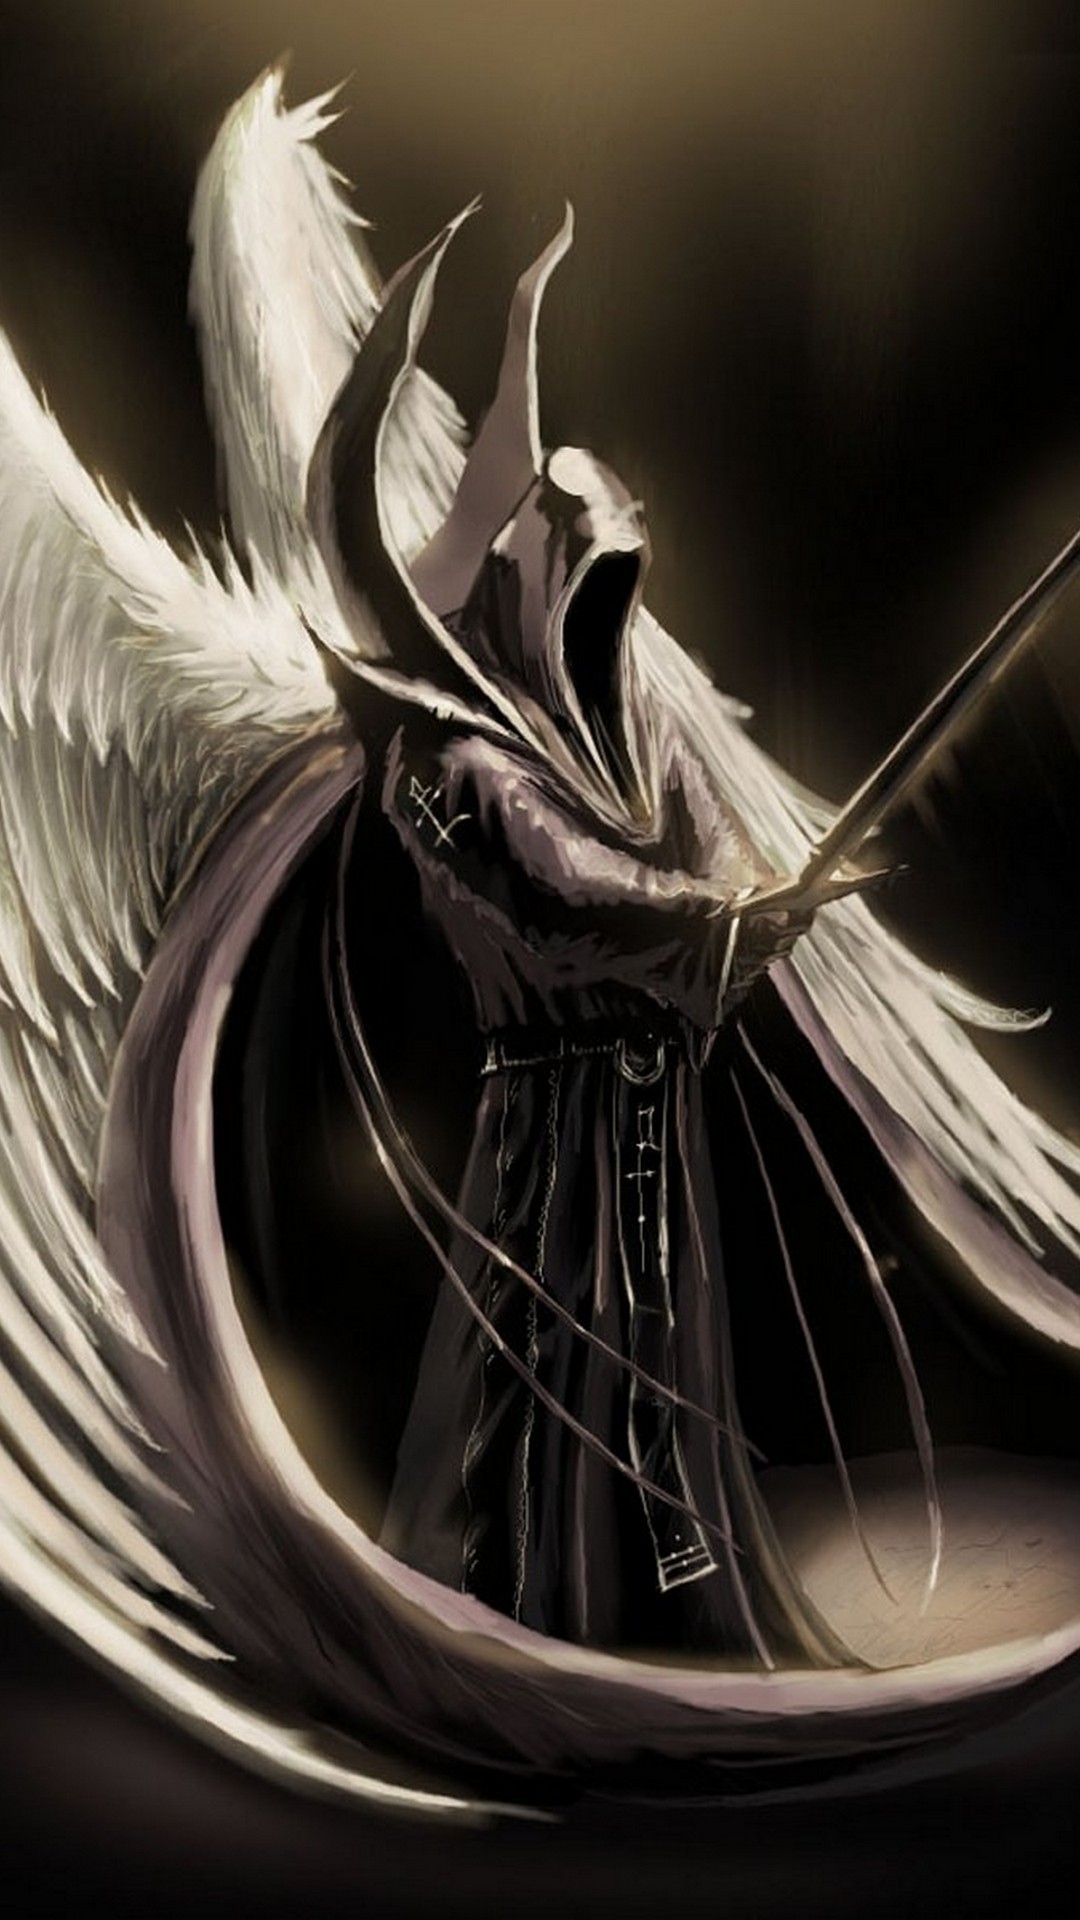 Dark Angel HD Wallpapers For Android With high-resolution 1080X1920 pixel. You can use this wallpaper for your Android backgrounds, Tablet, Samsung Screensavers, Mobile Phone Lock Screen and another Smartphones device